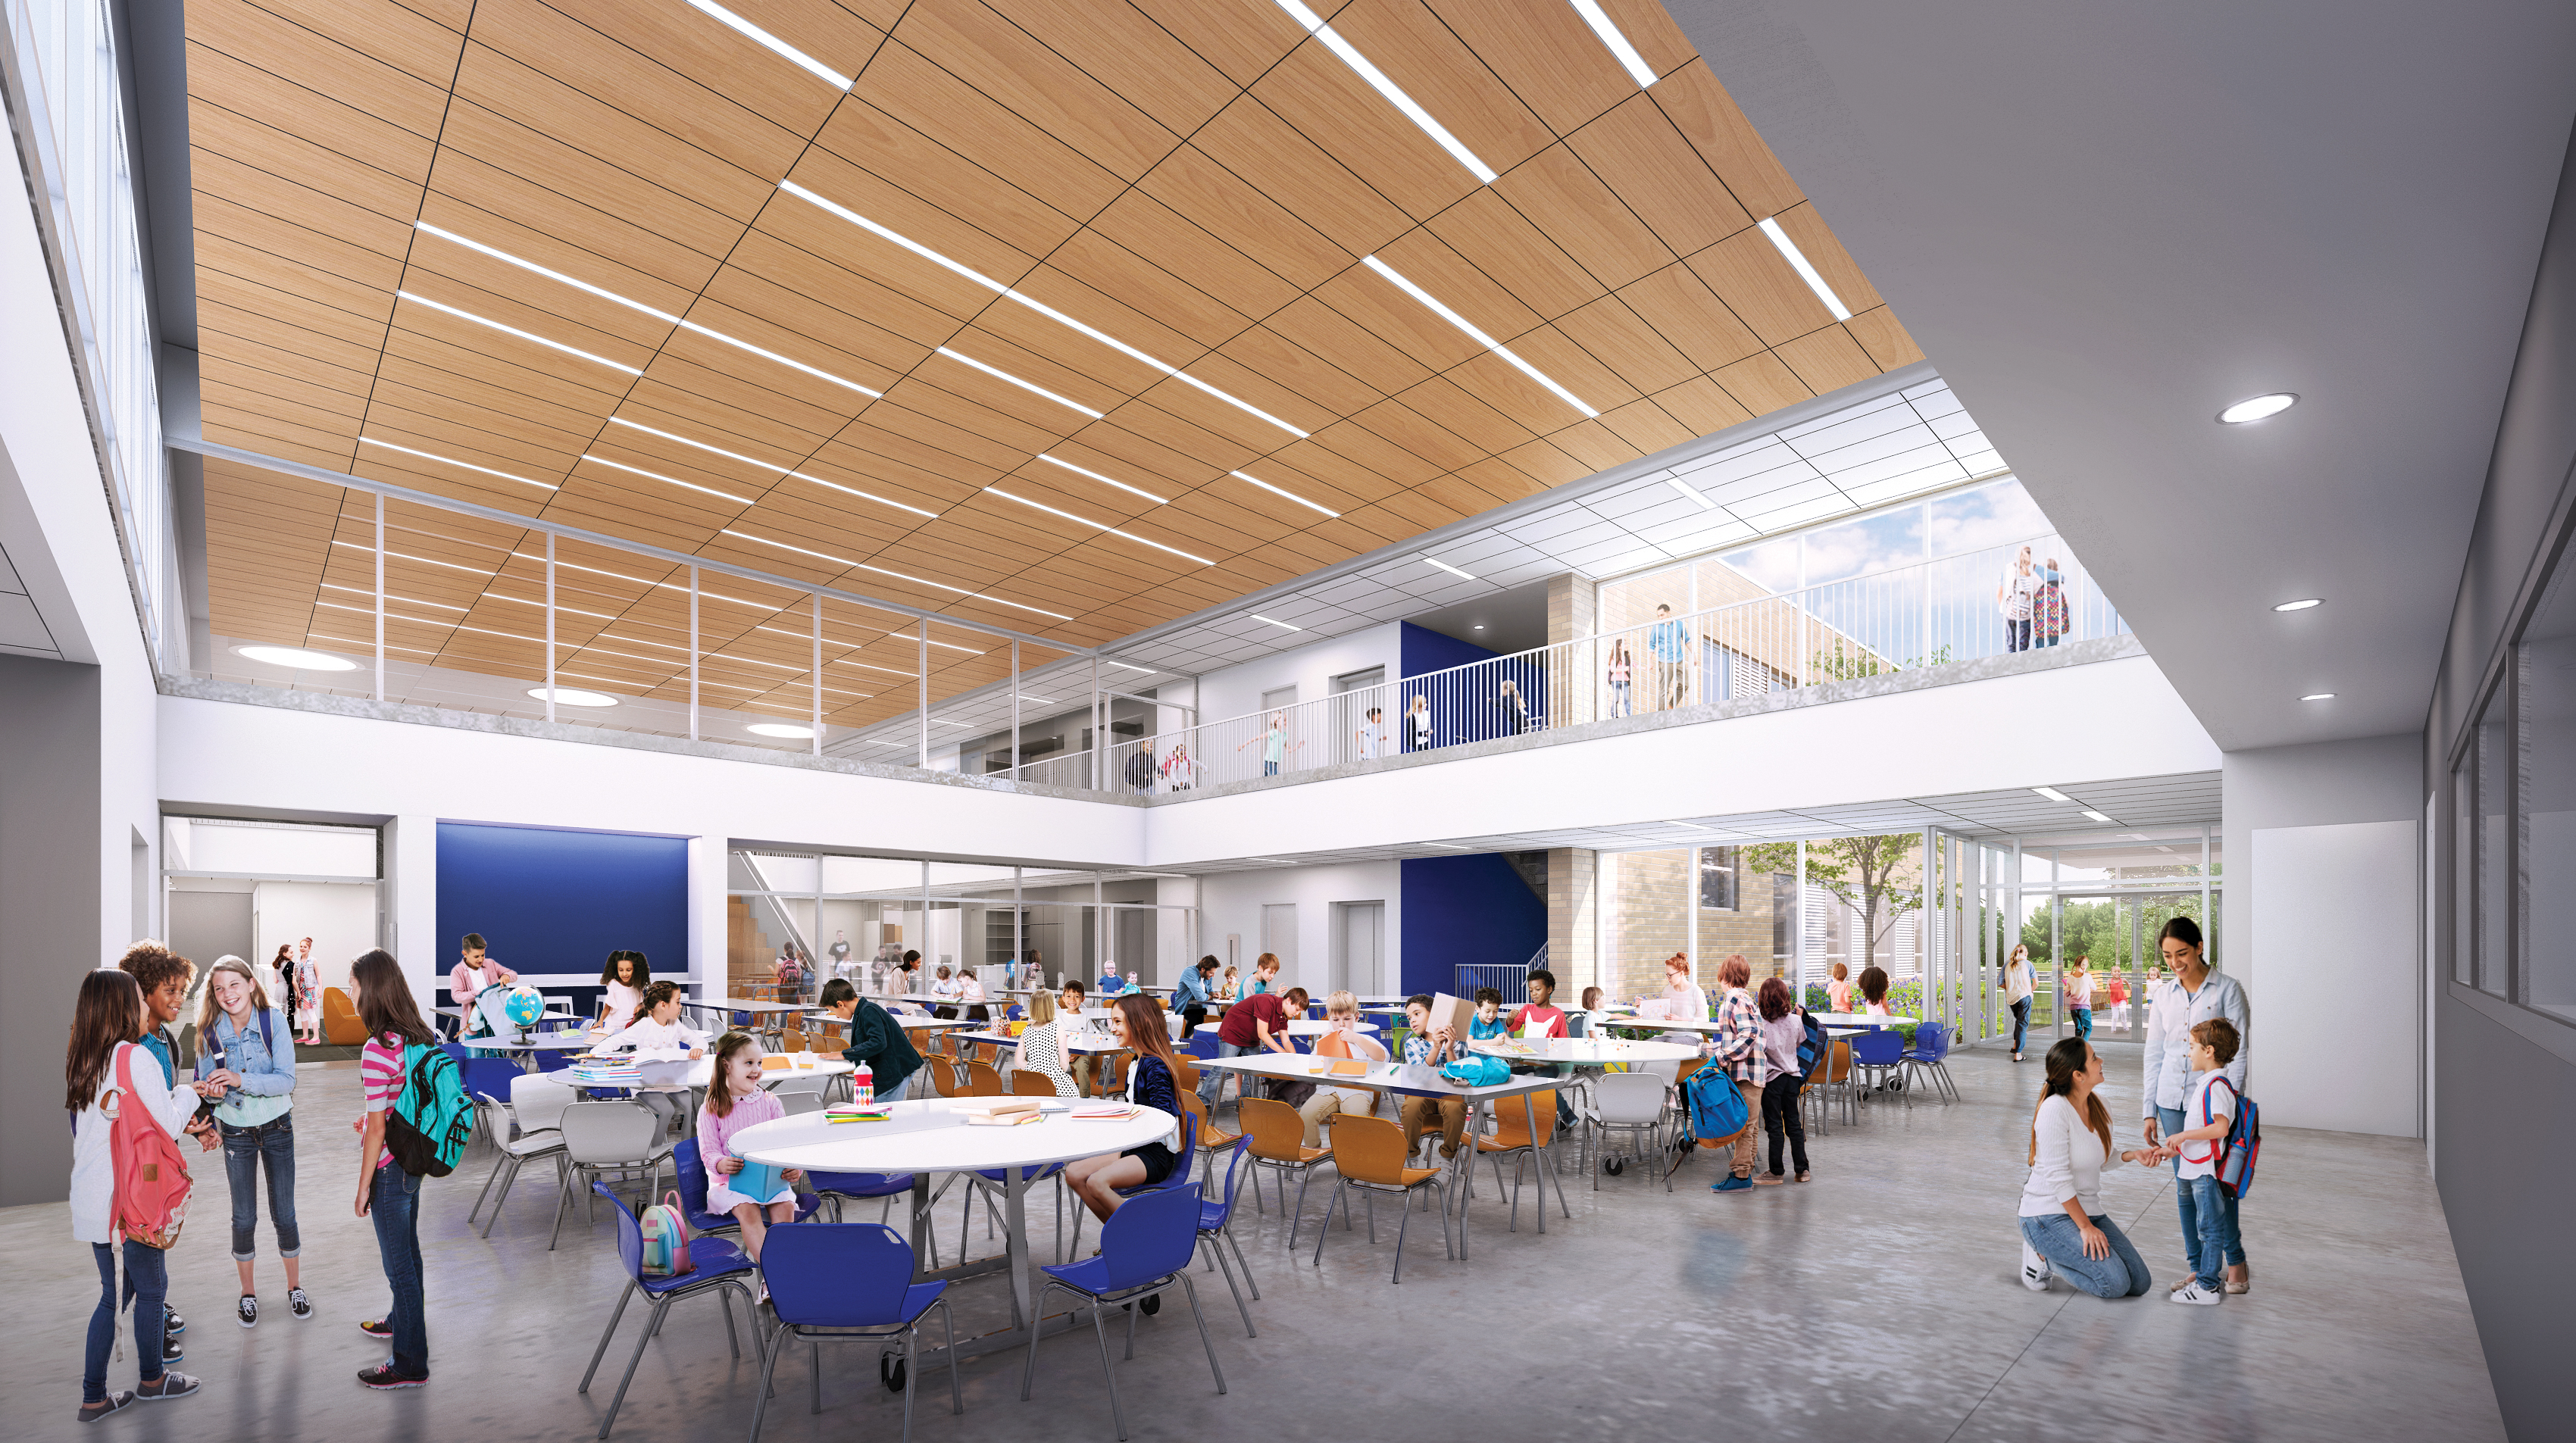 An interior rendering of the cafeteria / gathering space at the new Wickliffe Progressive Elementary School